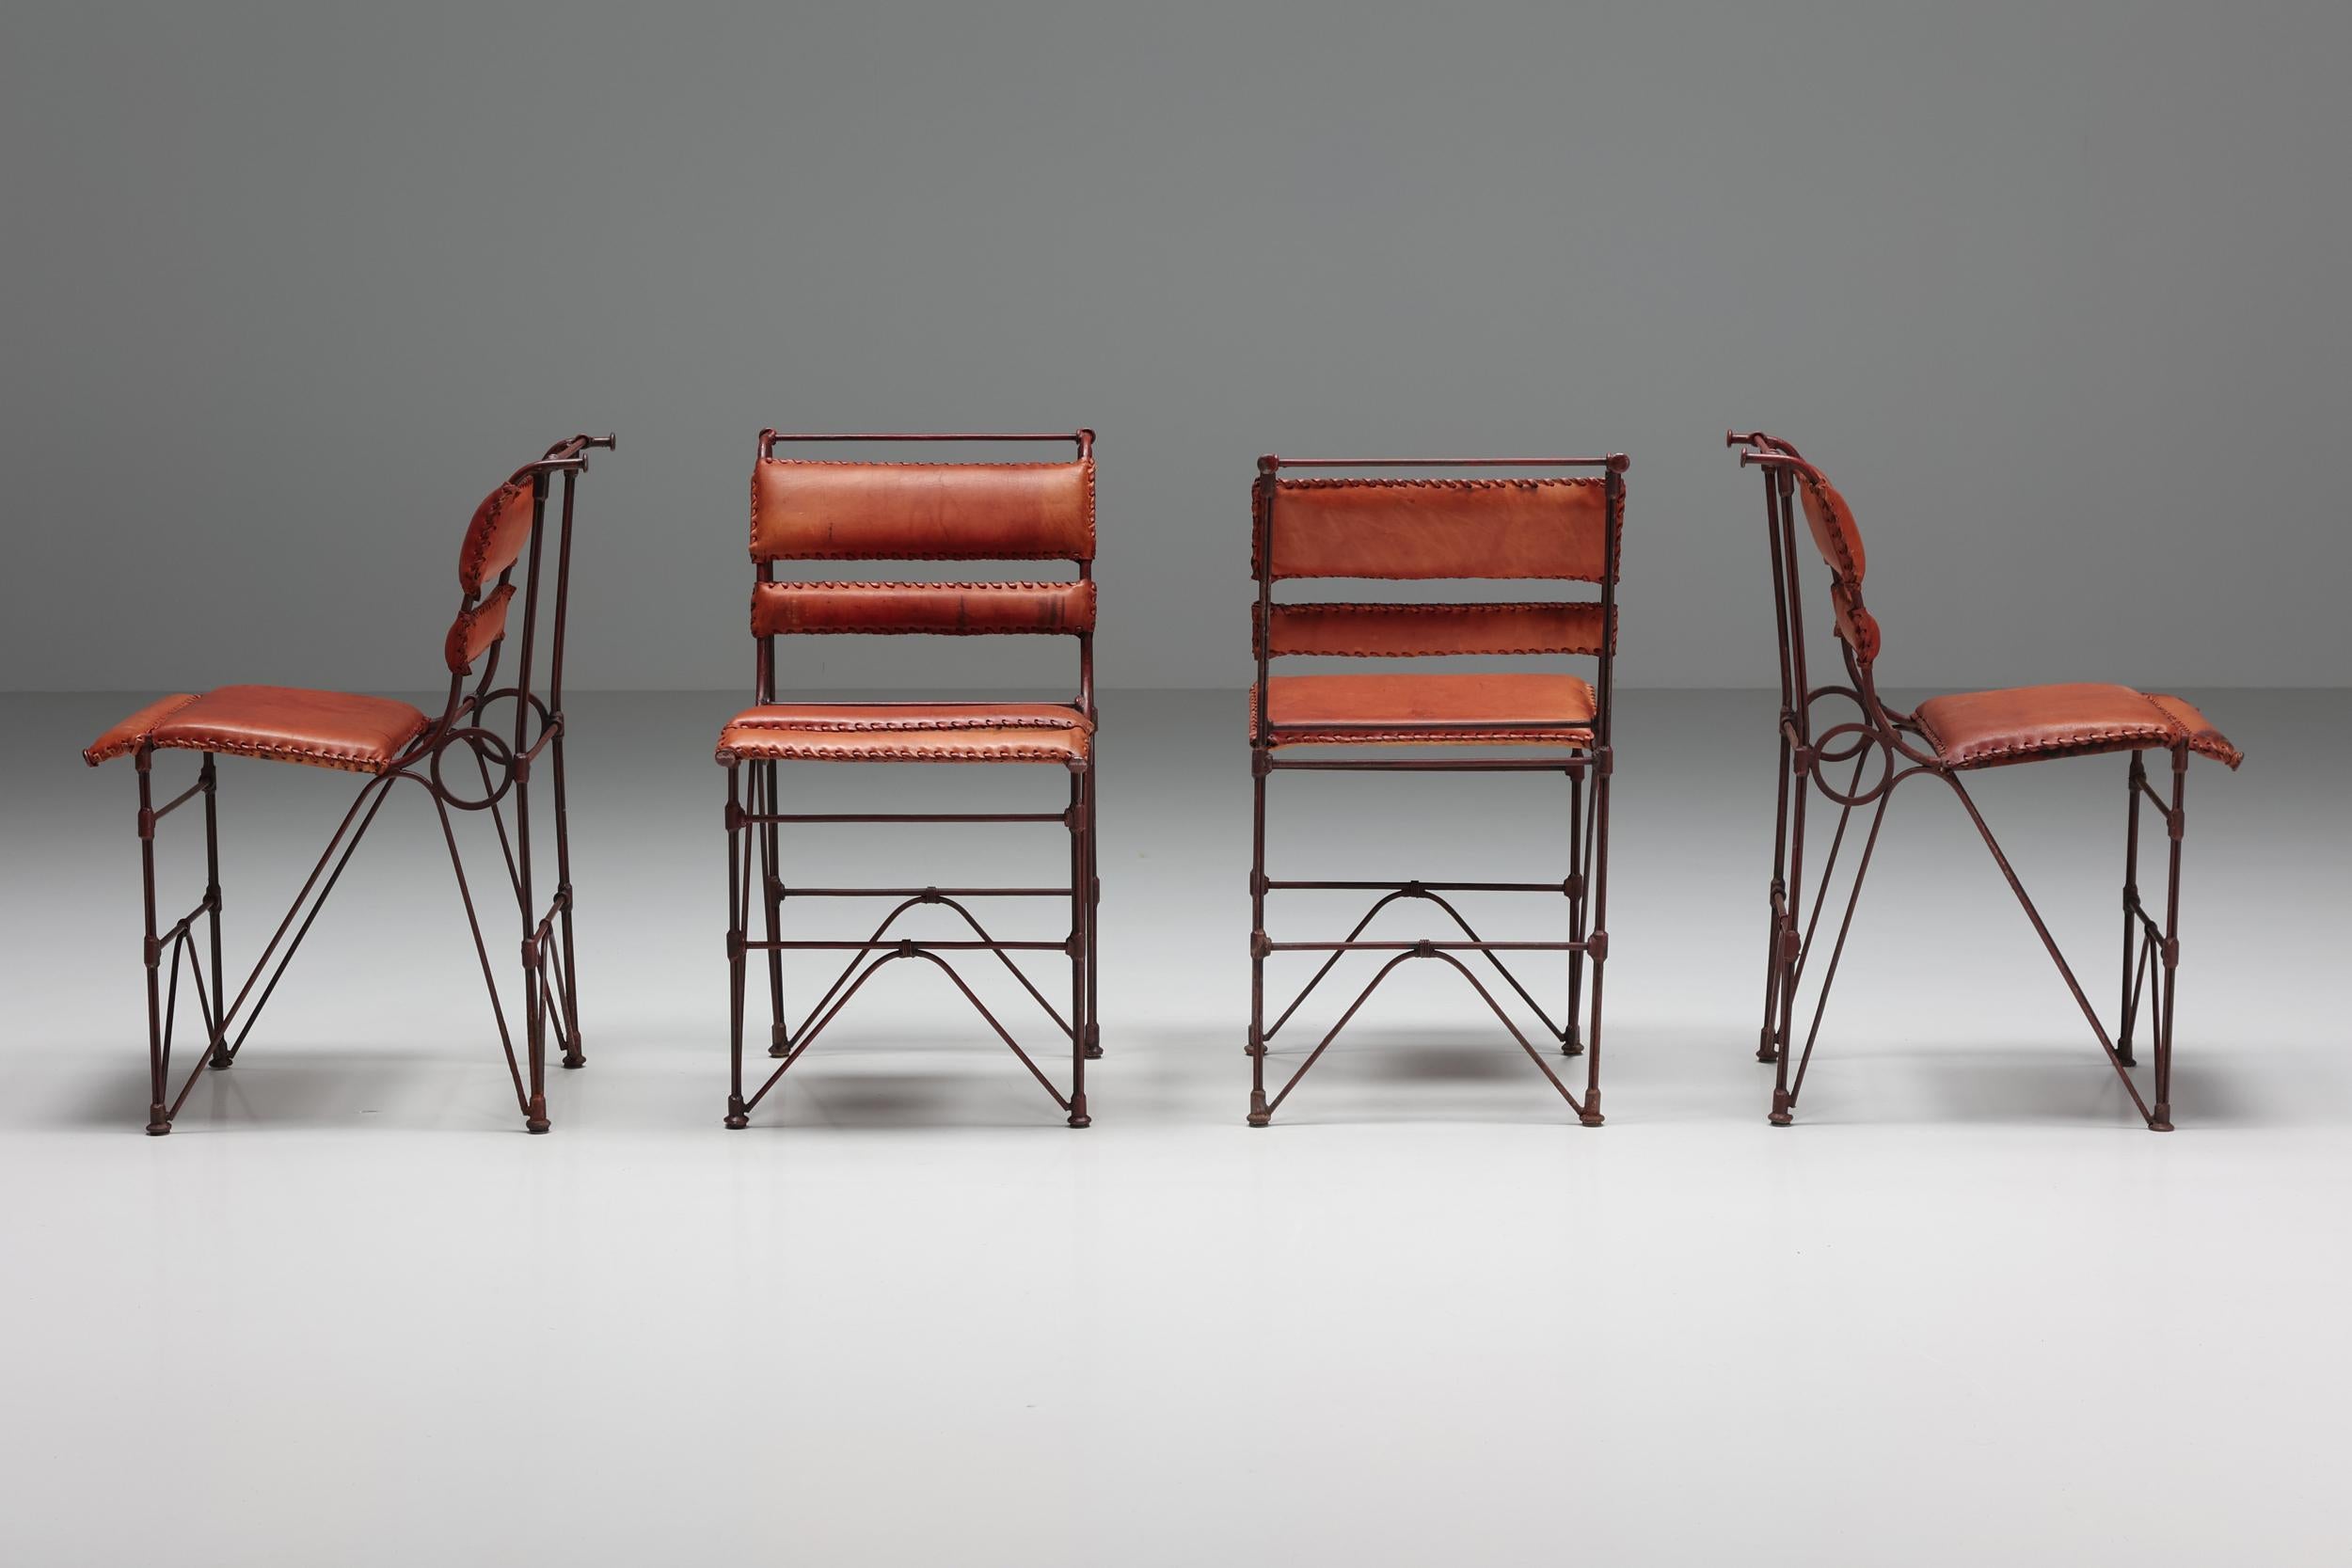 A remarkable set of four dining chairs in excellent condition. The organic steel frame goes hand in hand with the timeless cognac leather seating and back support. A very playful and organic design, yet it is very comfortable which makes it an ideal